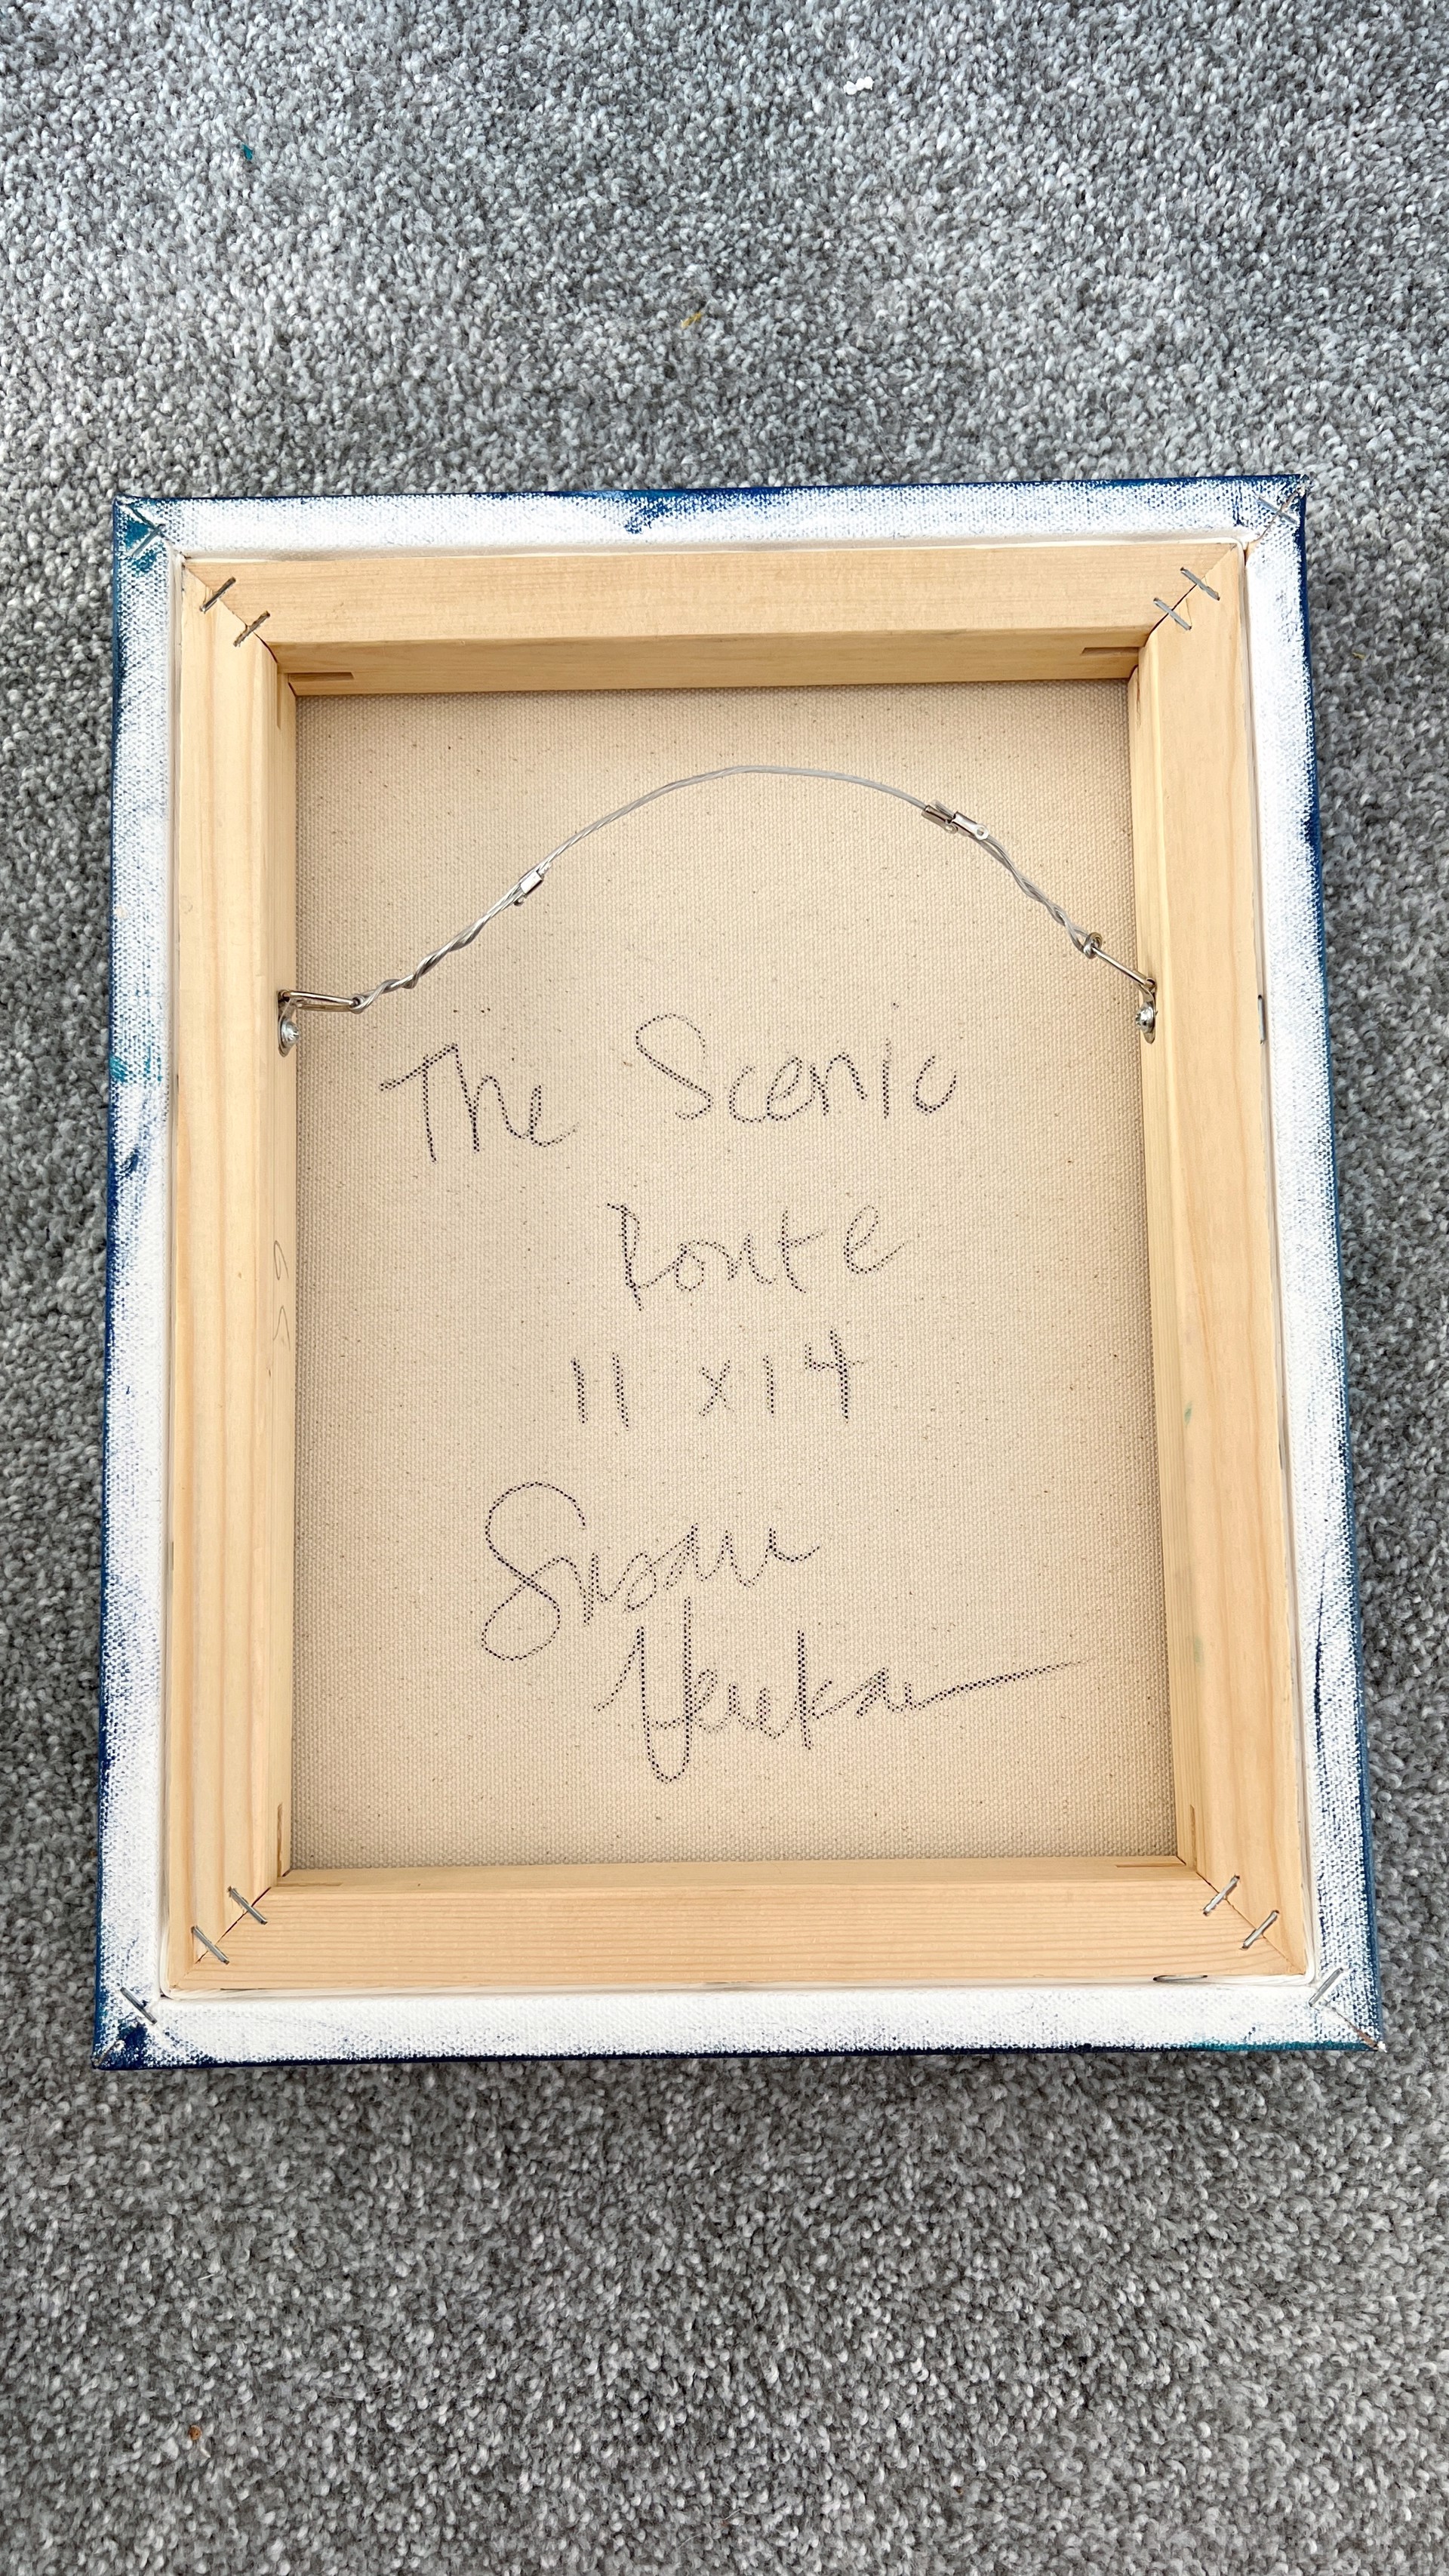 The Scenic Route by Susan Verekar